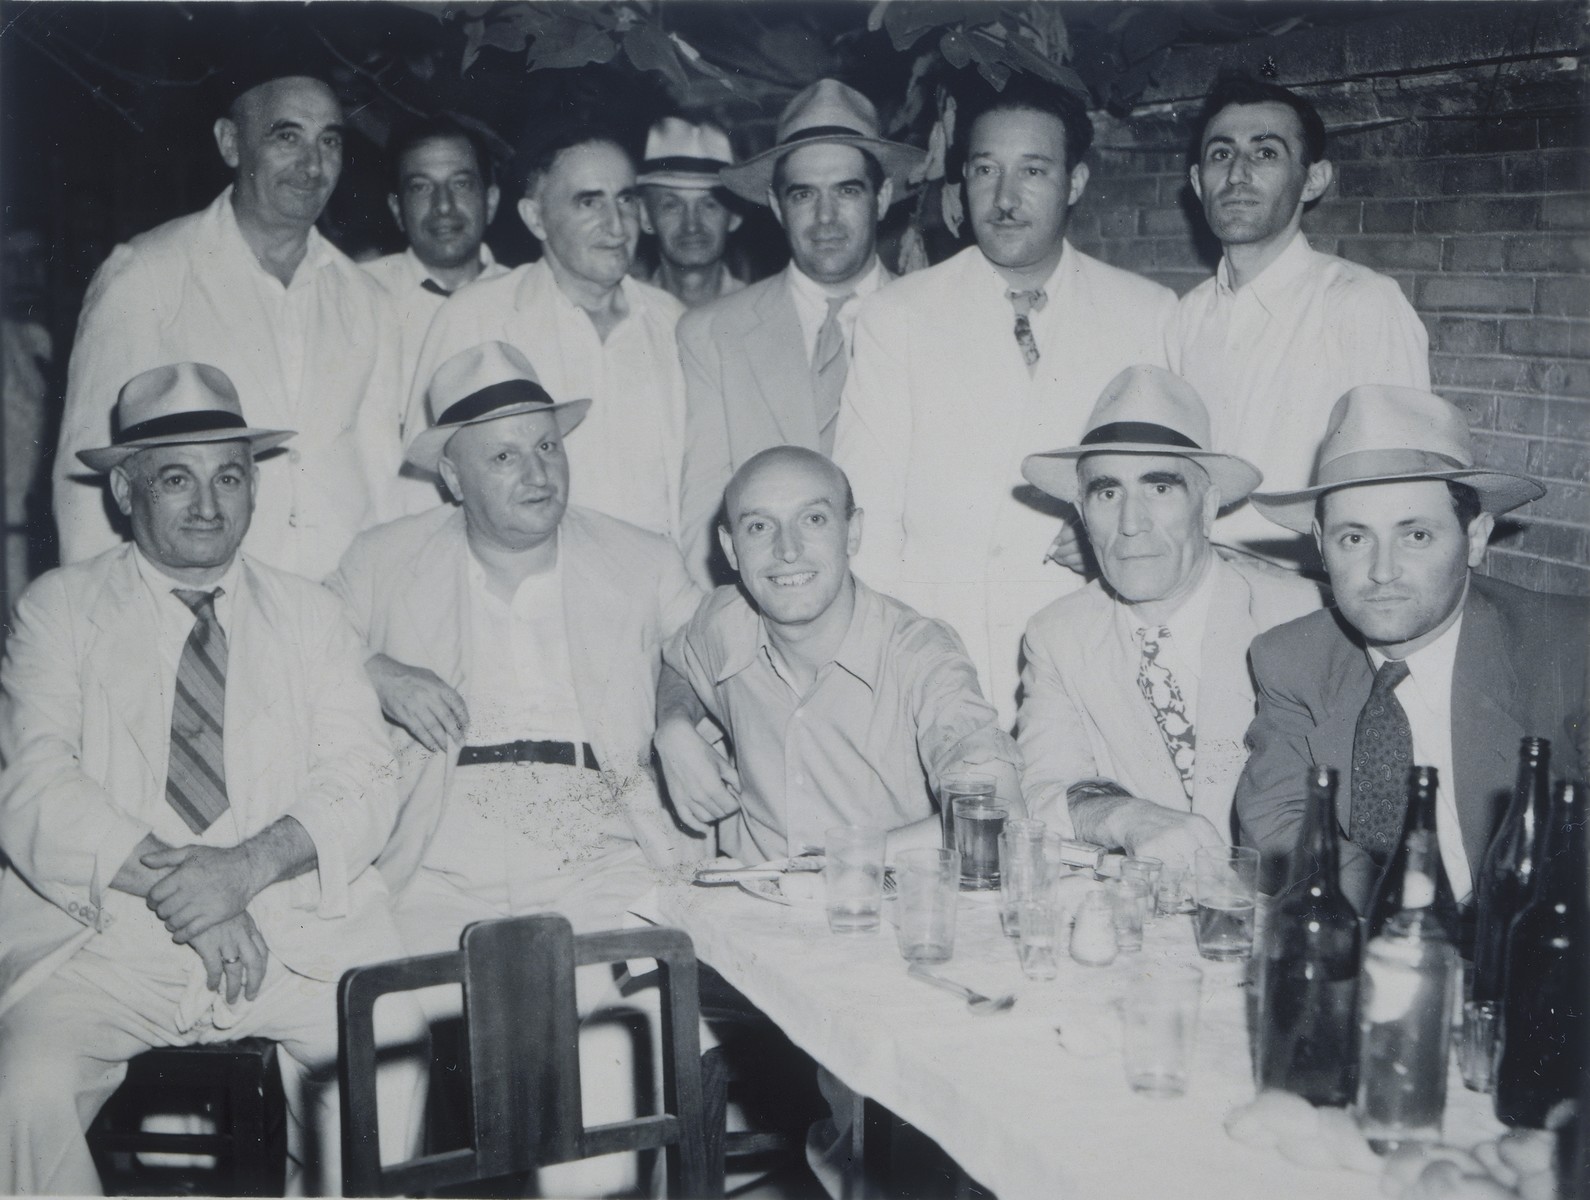 Group portrait of members of the Mir Yeshiva in Shanghai.

Hirsch Millner is seated at the bottom right.  Eli Rolavsky is standing on the far right.